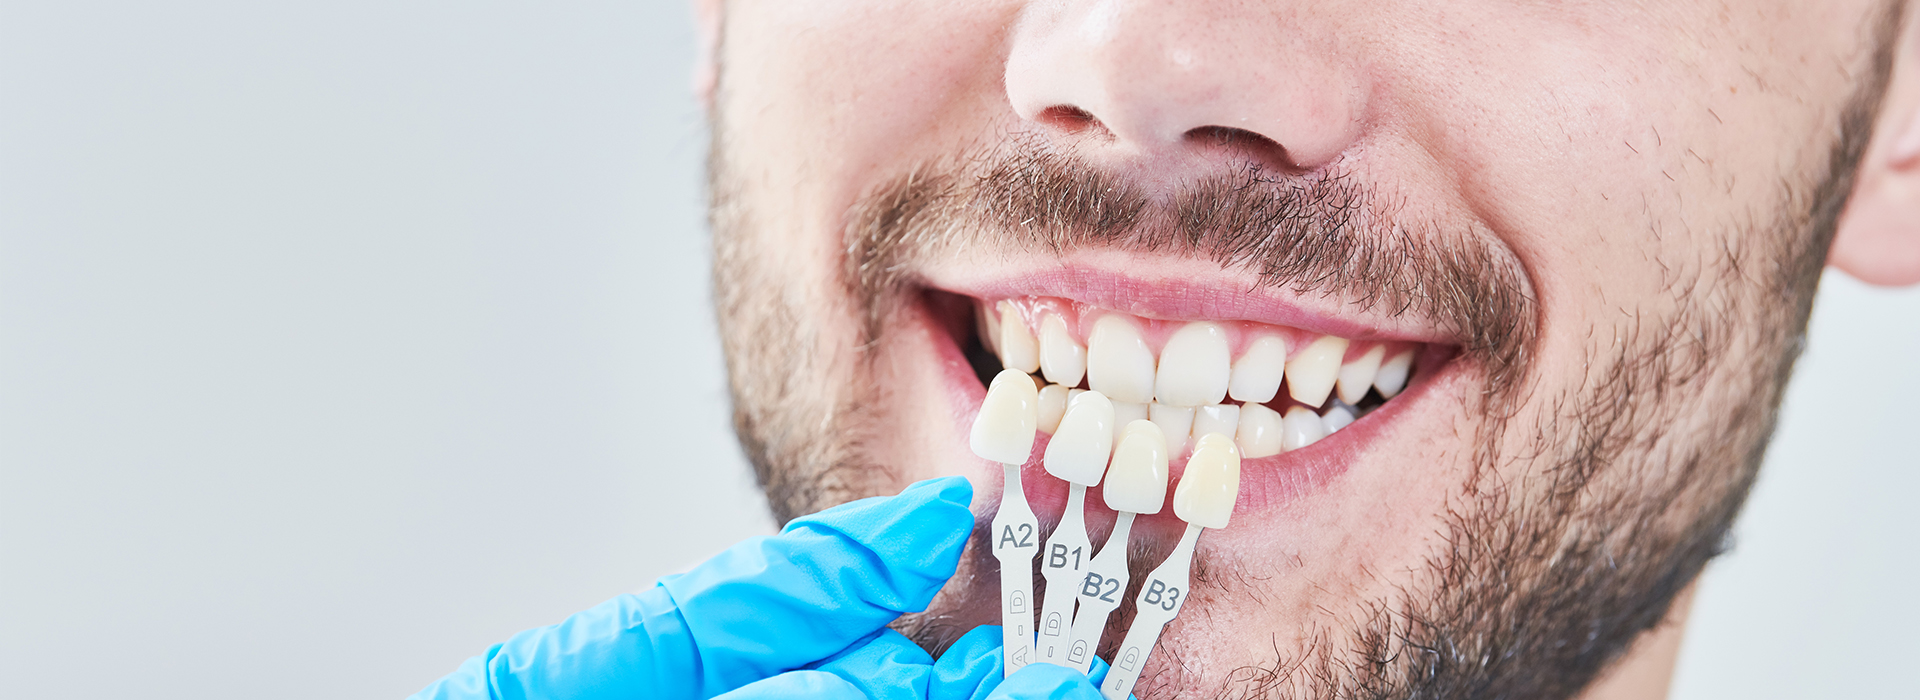 Aberdeen Family Dentistry | Dentures, Implant Dentistry and Oral Exams